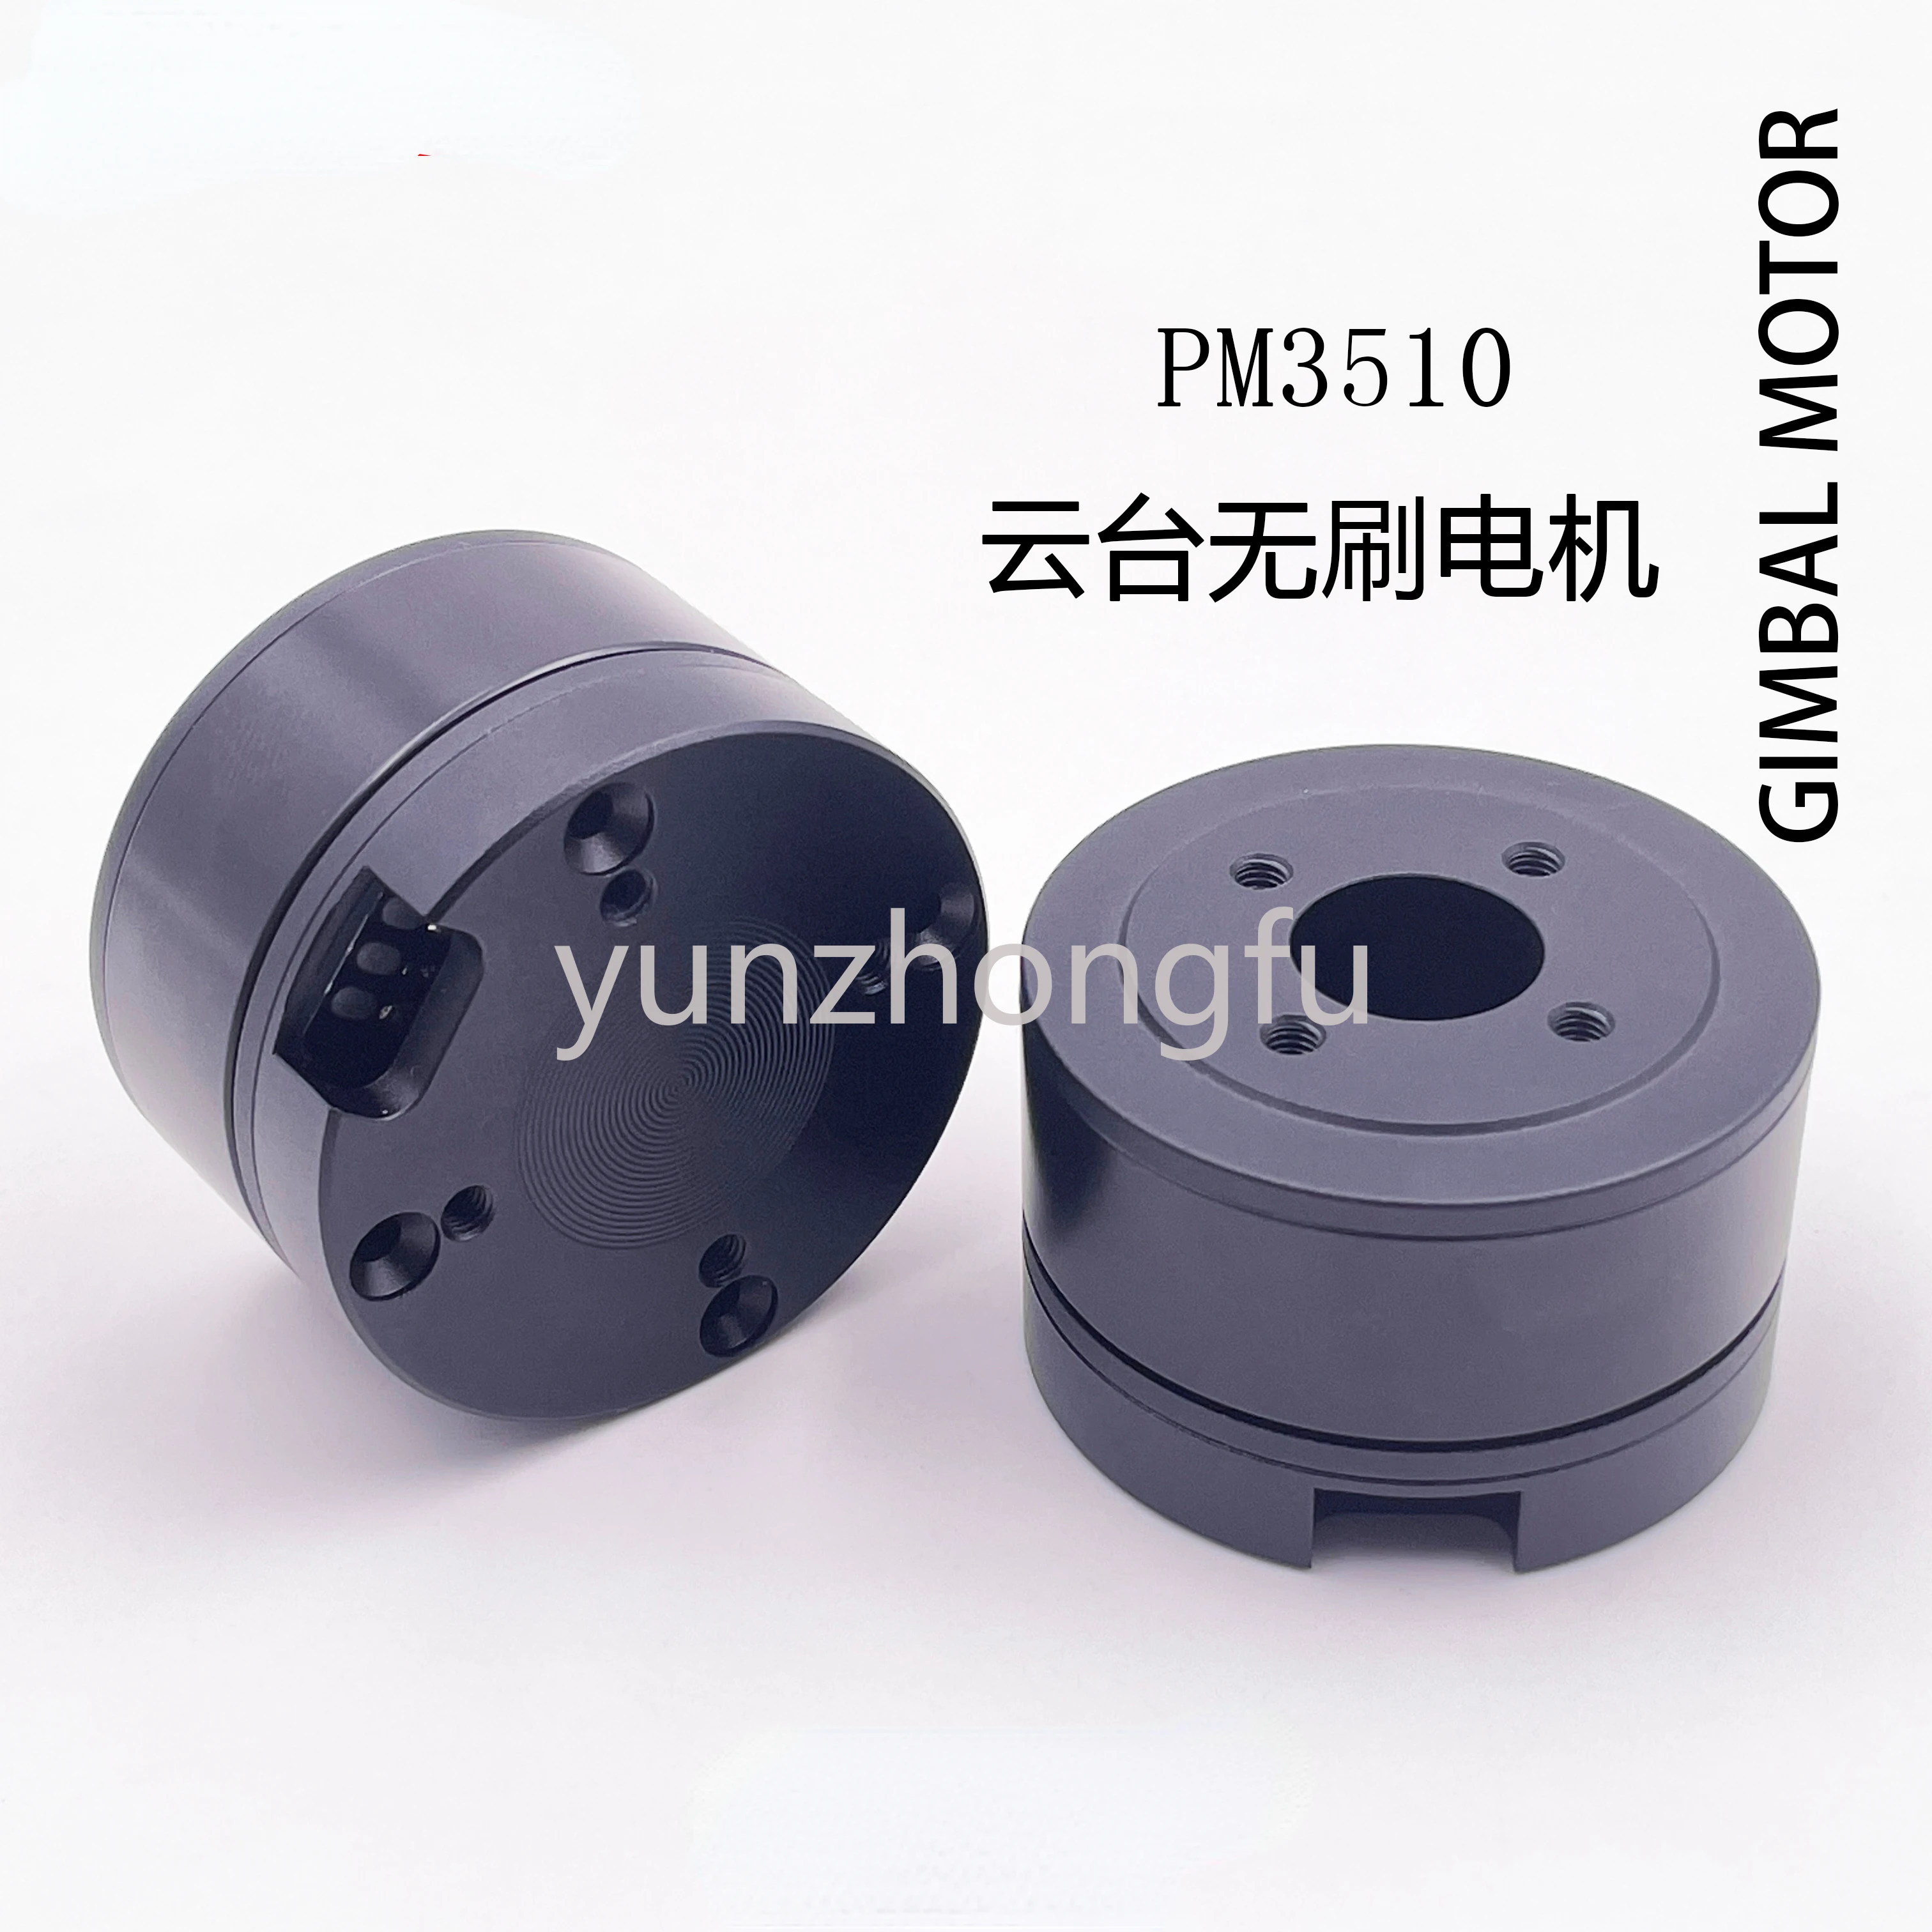 

PM3510 Brushless Motor with Cradle Head AS5048 Encoder DC Pod Code Disk Micro Single Motor Zoom PTZ Camera